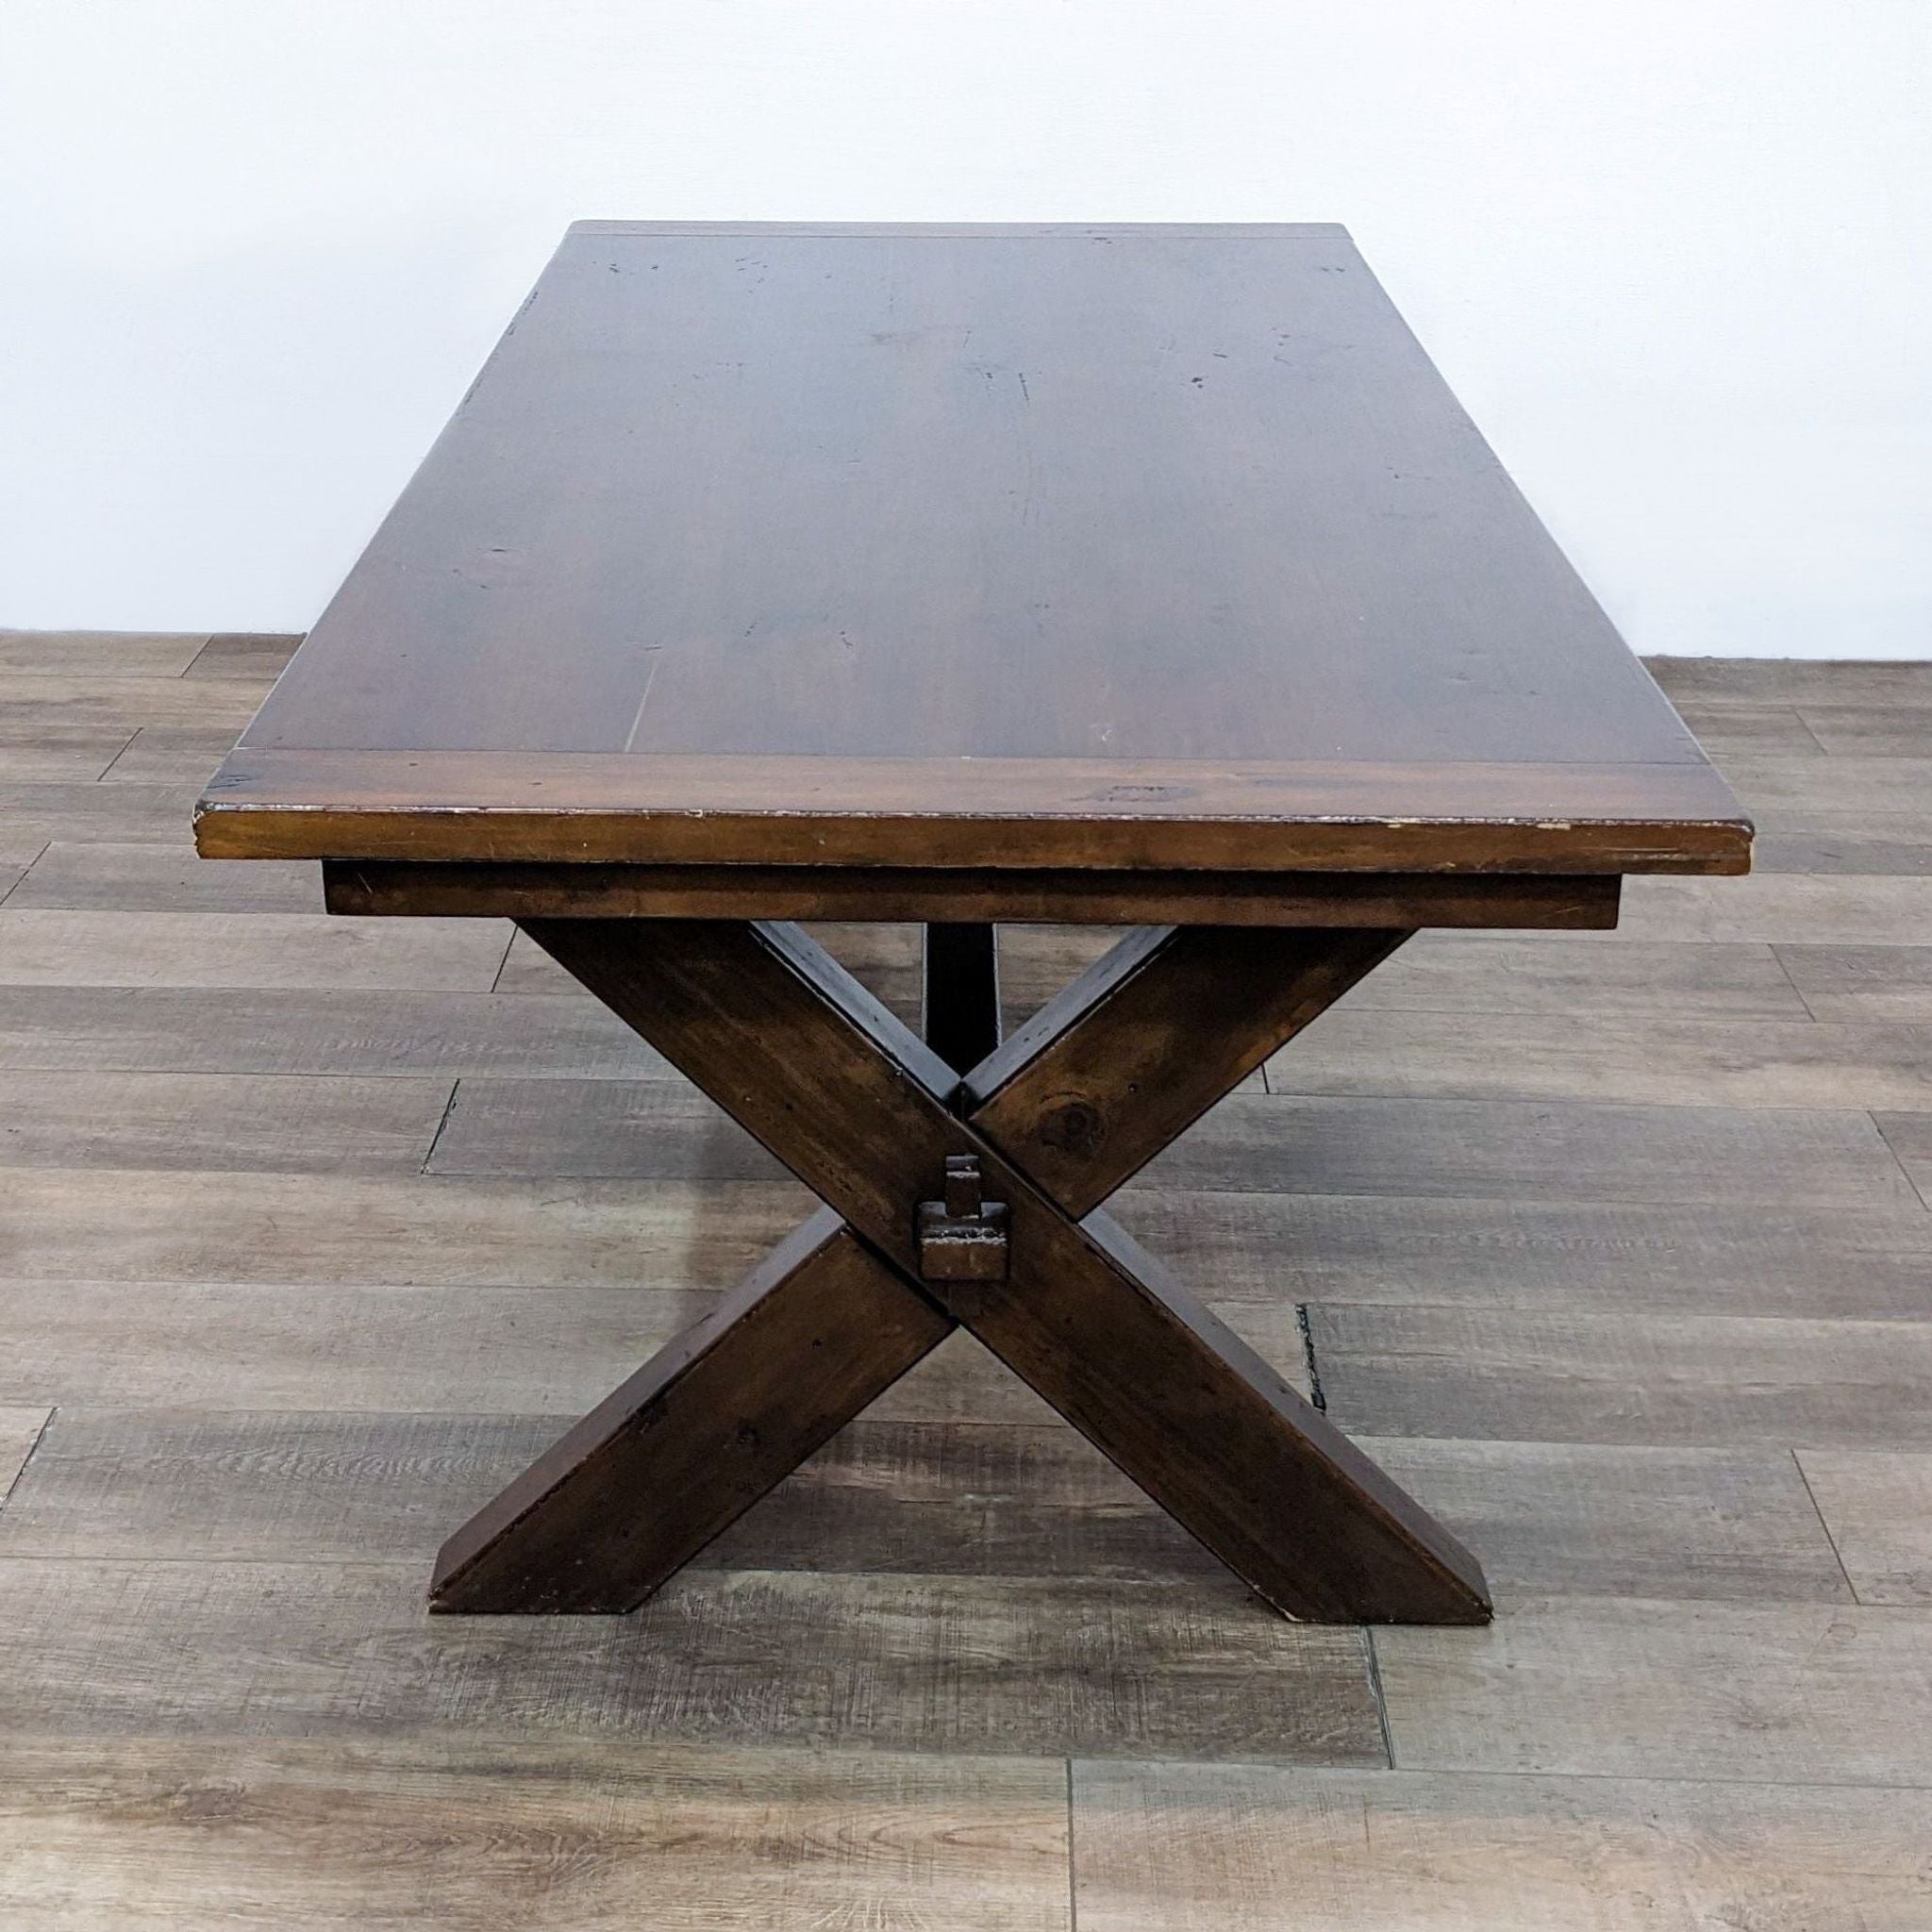 Front view of Tuscano dining table by Pottery Barn, showing its keyed-through tenons and extendable top.